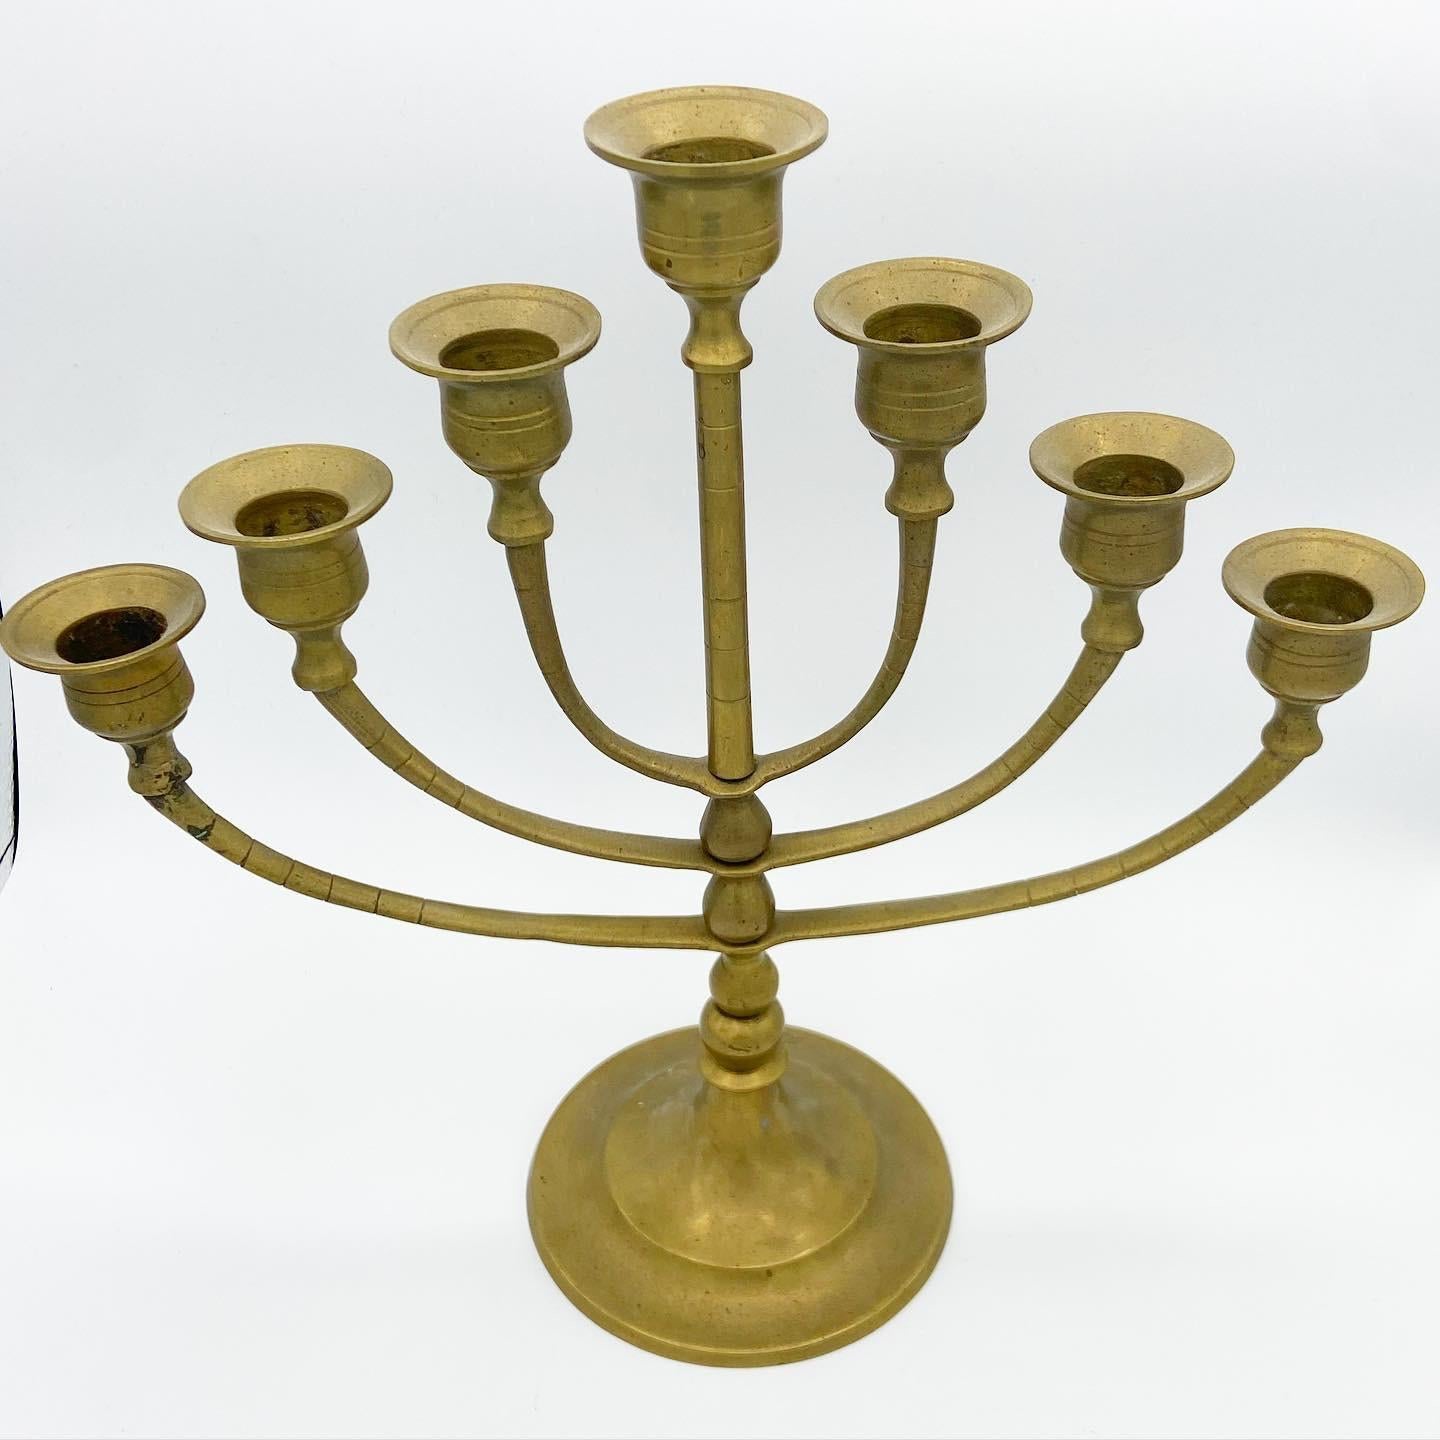 Beautiful brass candelabra with 7 candlestick holders.
